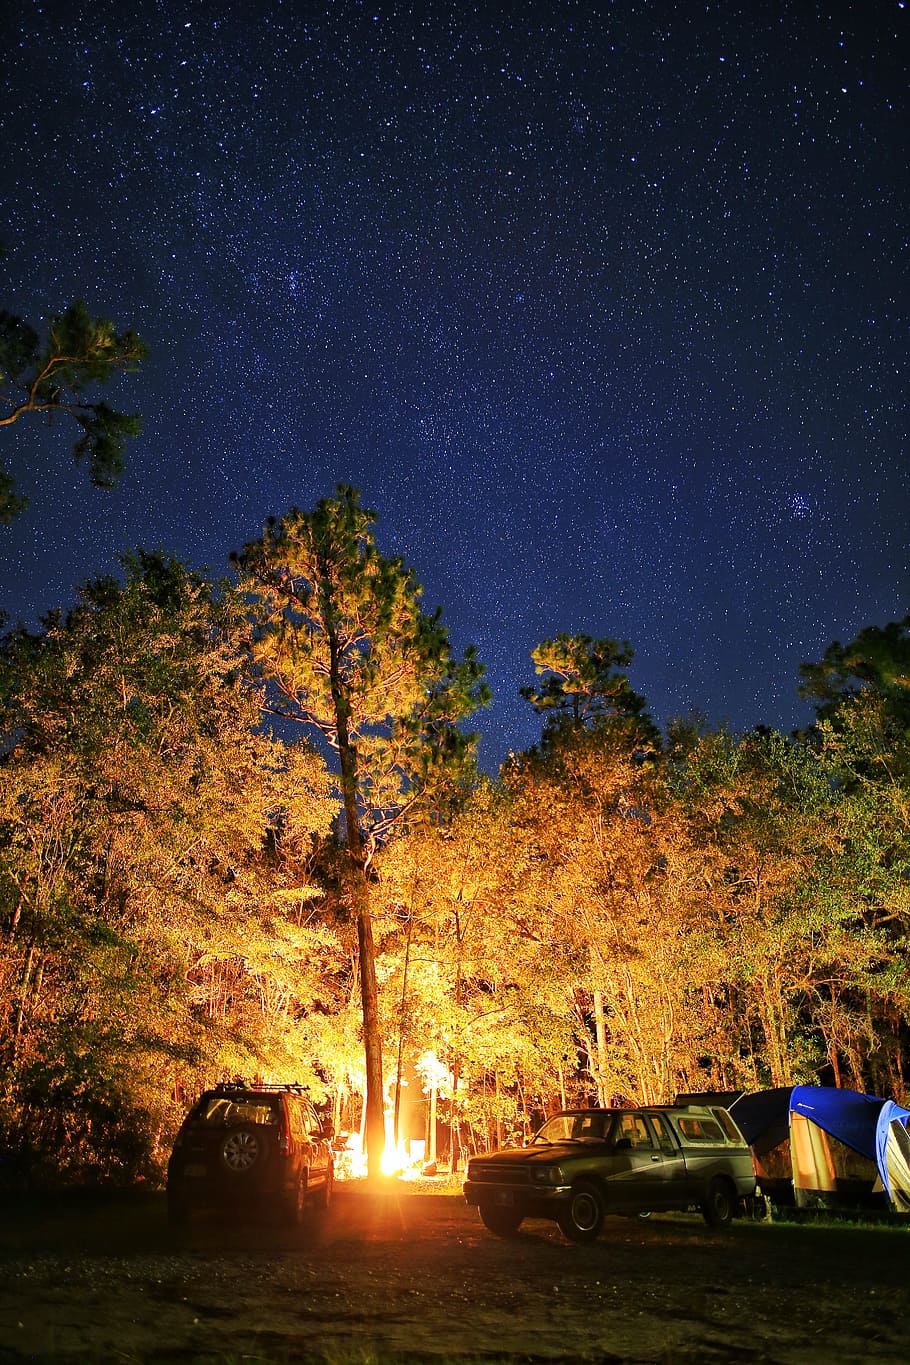 trees at night, outdoor, pinetree, campfire, star, cold, coolnight